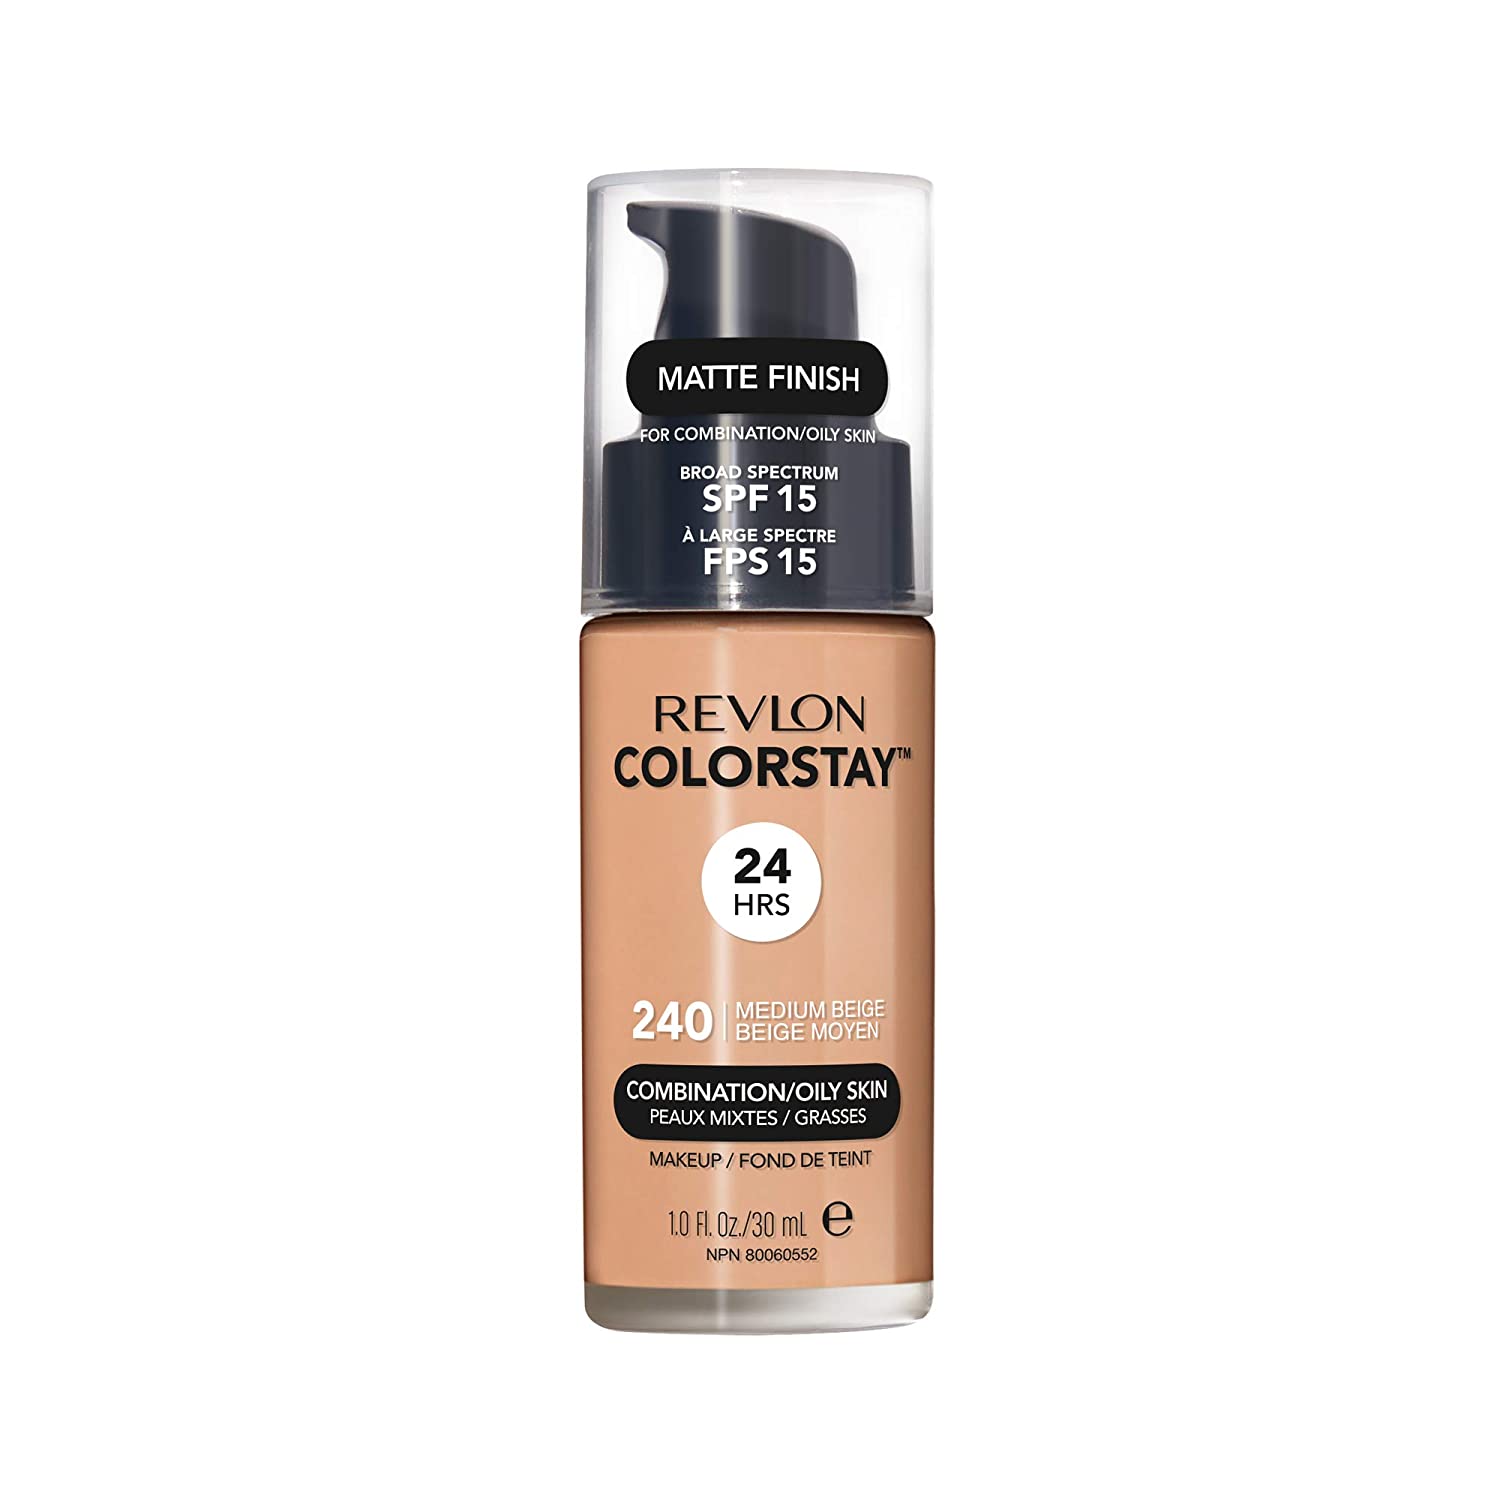 Revlon ColorStay Liquid Foundation Makeup for Combination/Oily Skin SPF 15, Longwear Medium-Full Coverage with Matte Finish $8.01